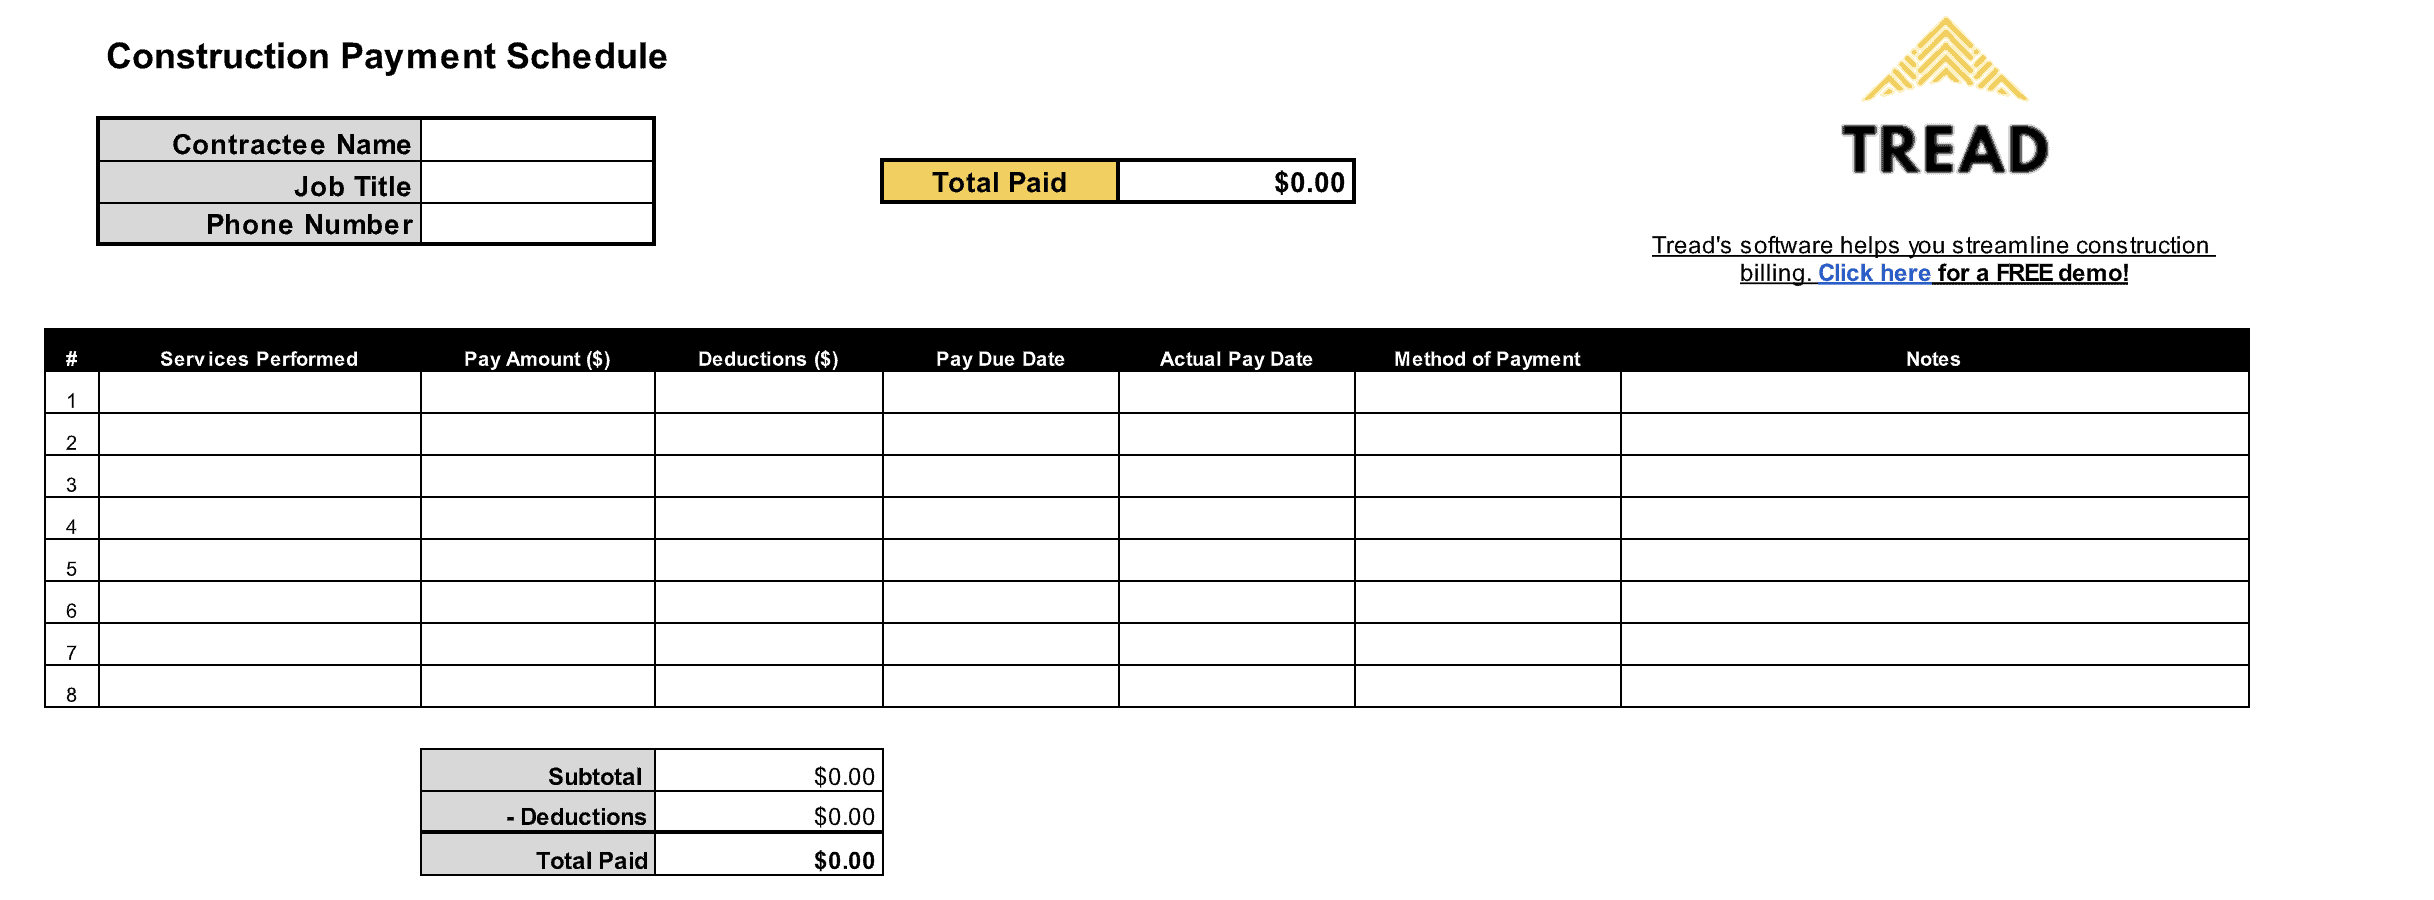 Construction Payment Schedule Template [Free Download]